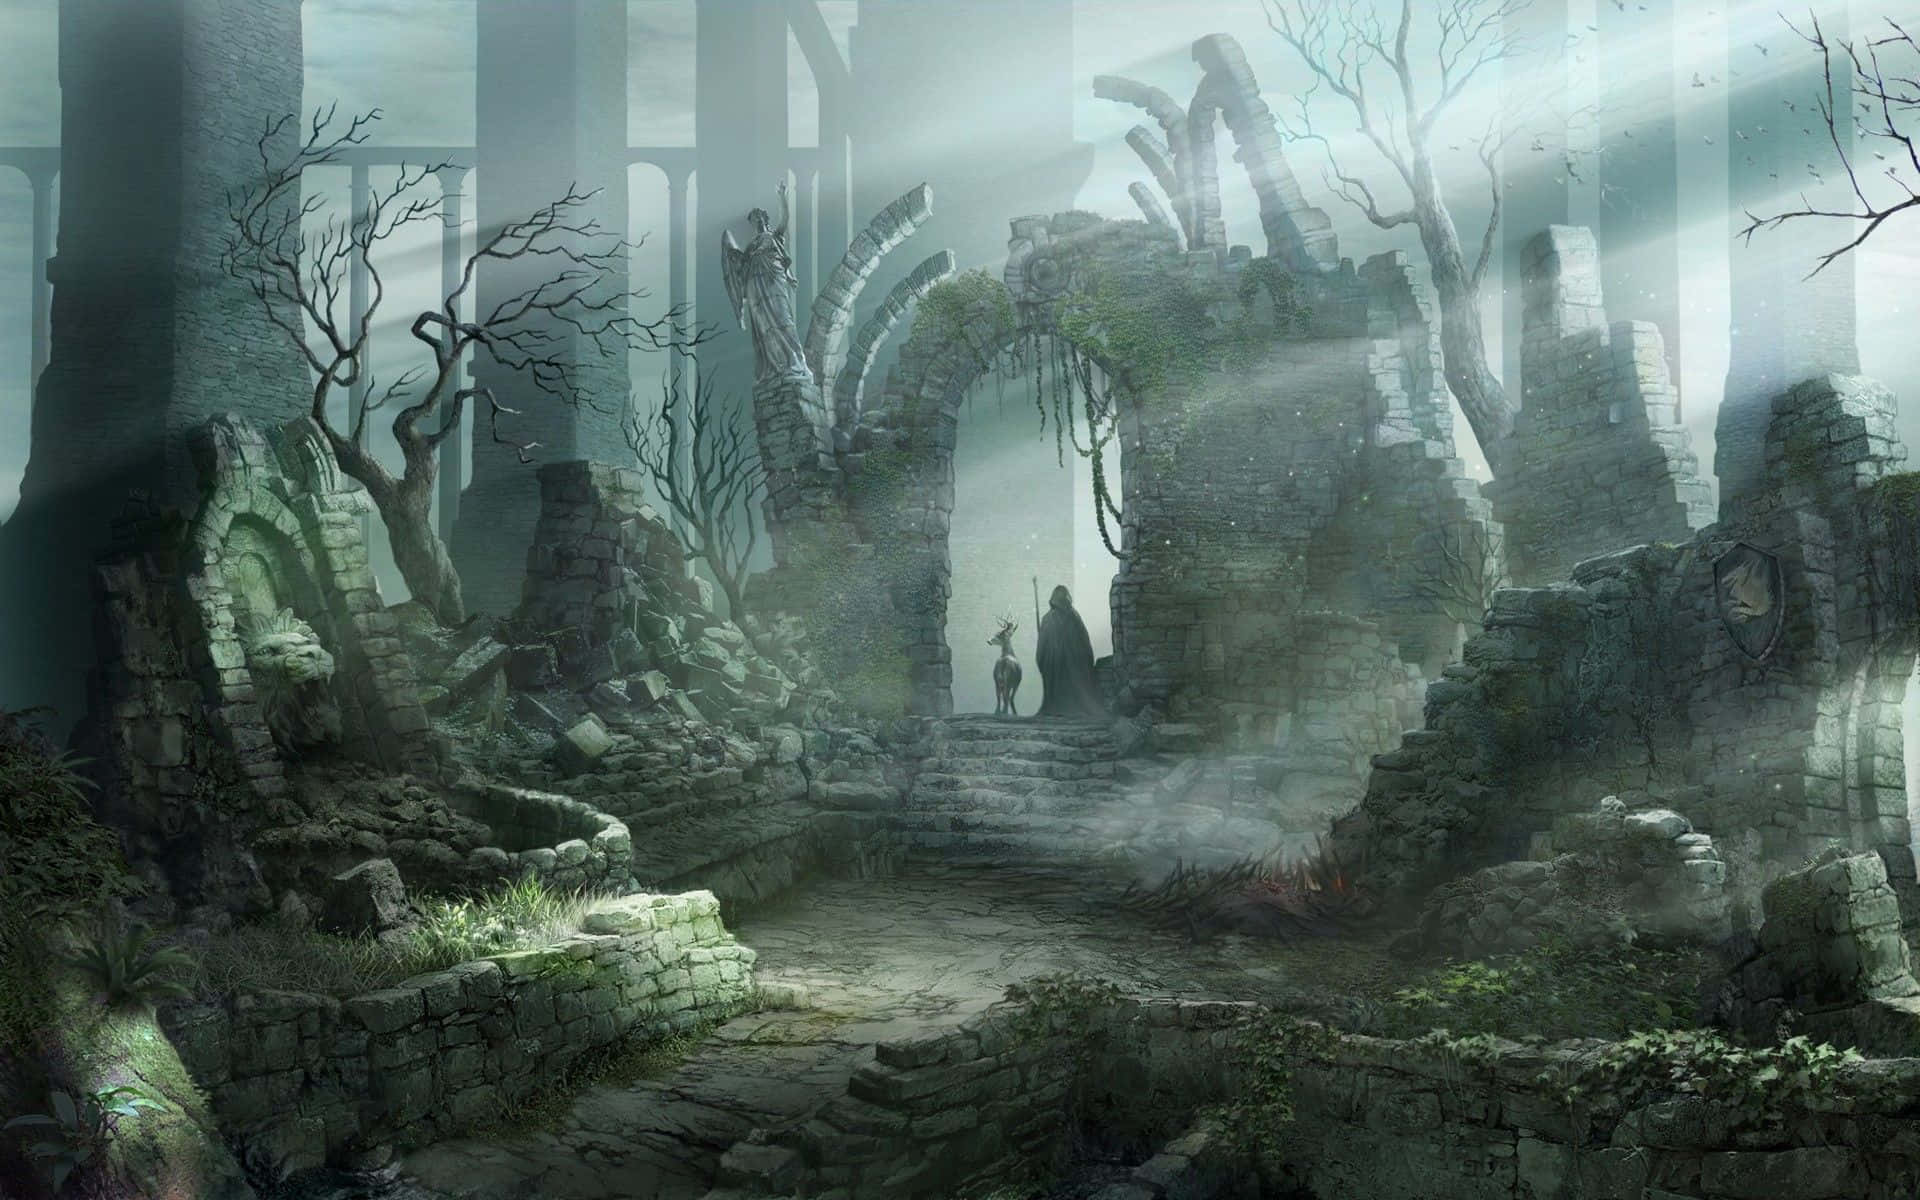 a fantasy scene with a ruined castle and trees